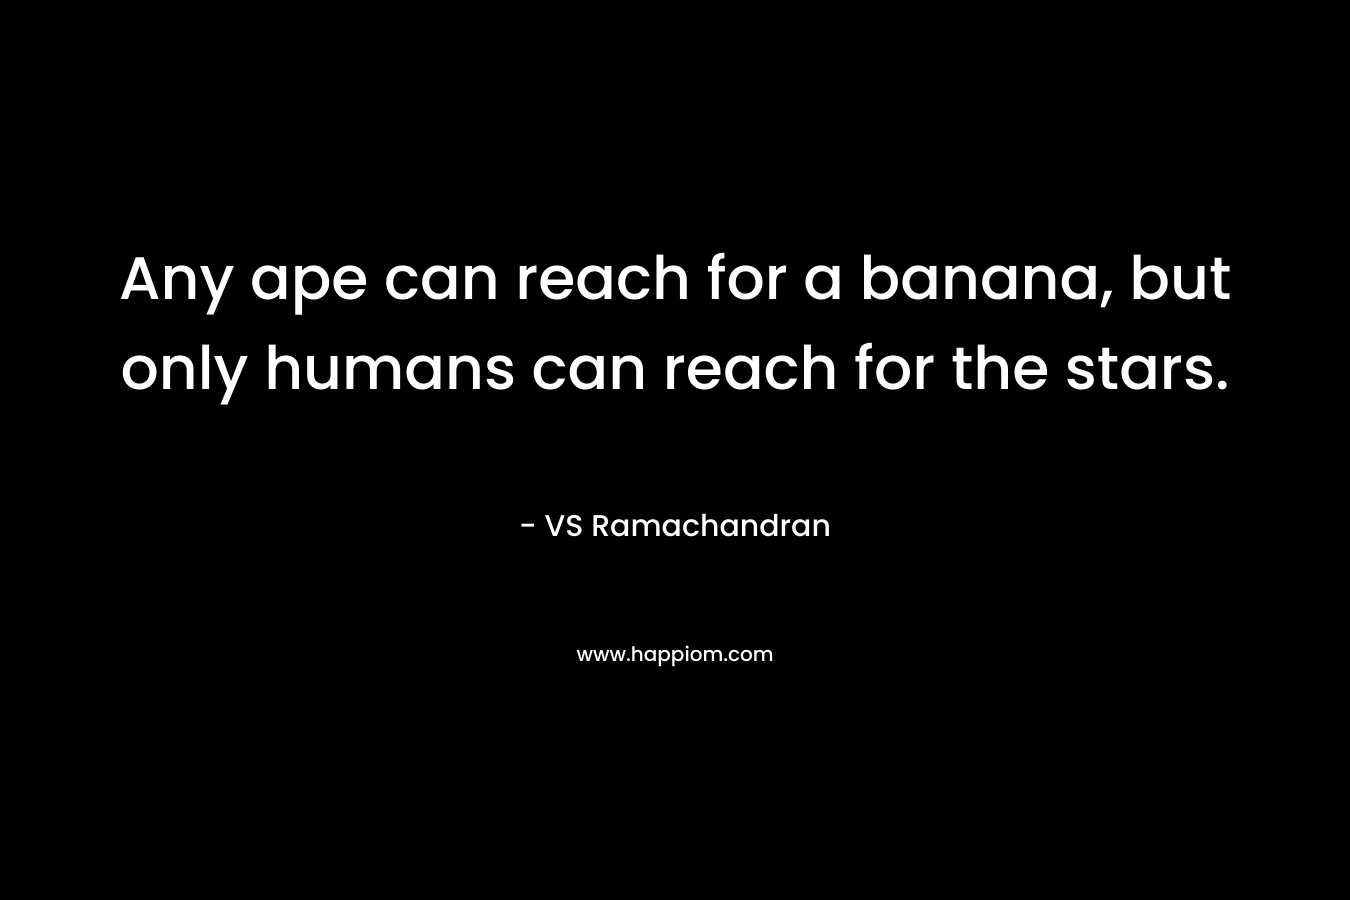 Any ape can reach for a banana, but only humans can reach for the stars. – VS Ramachandran